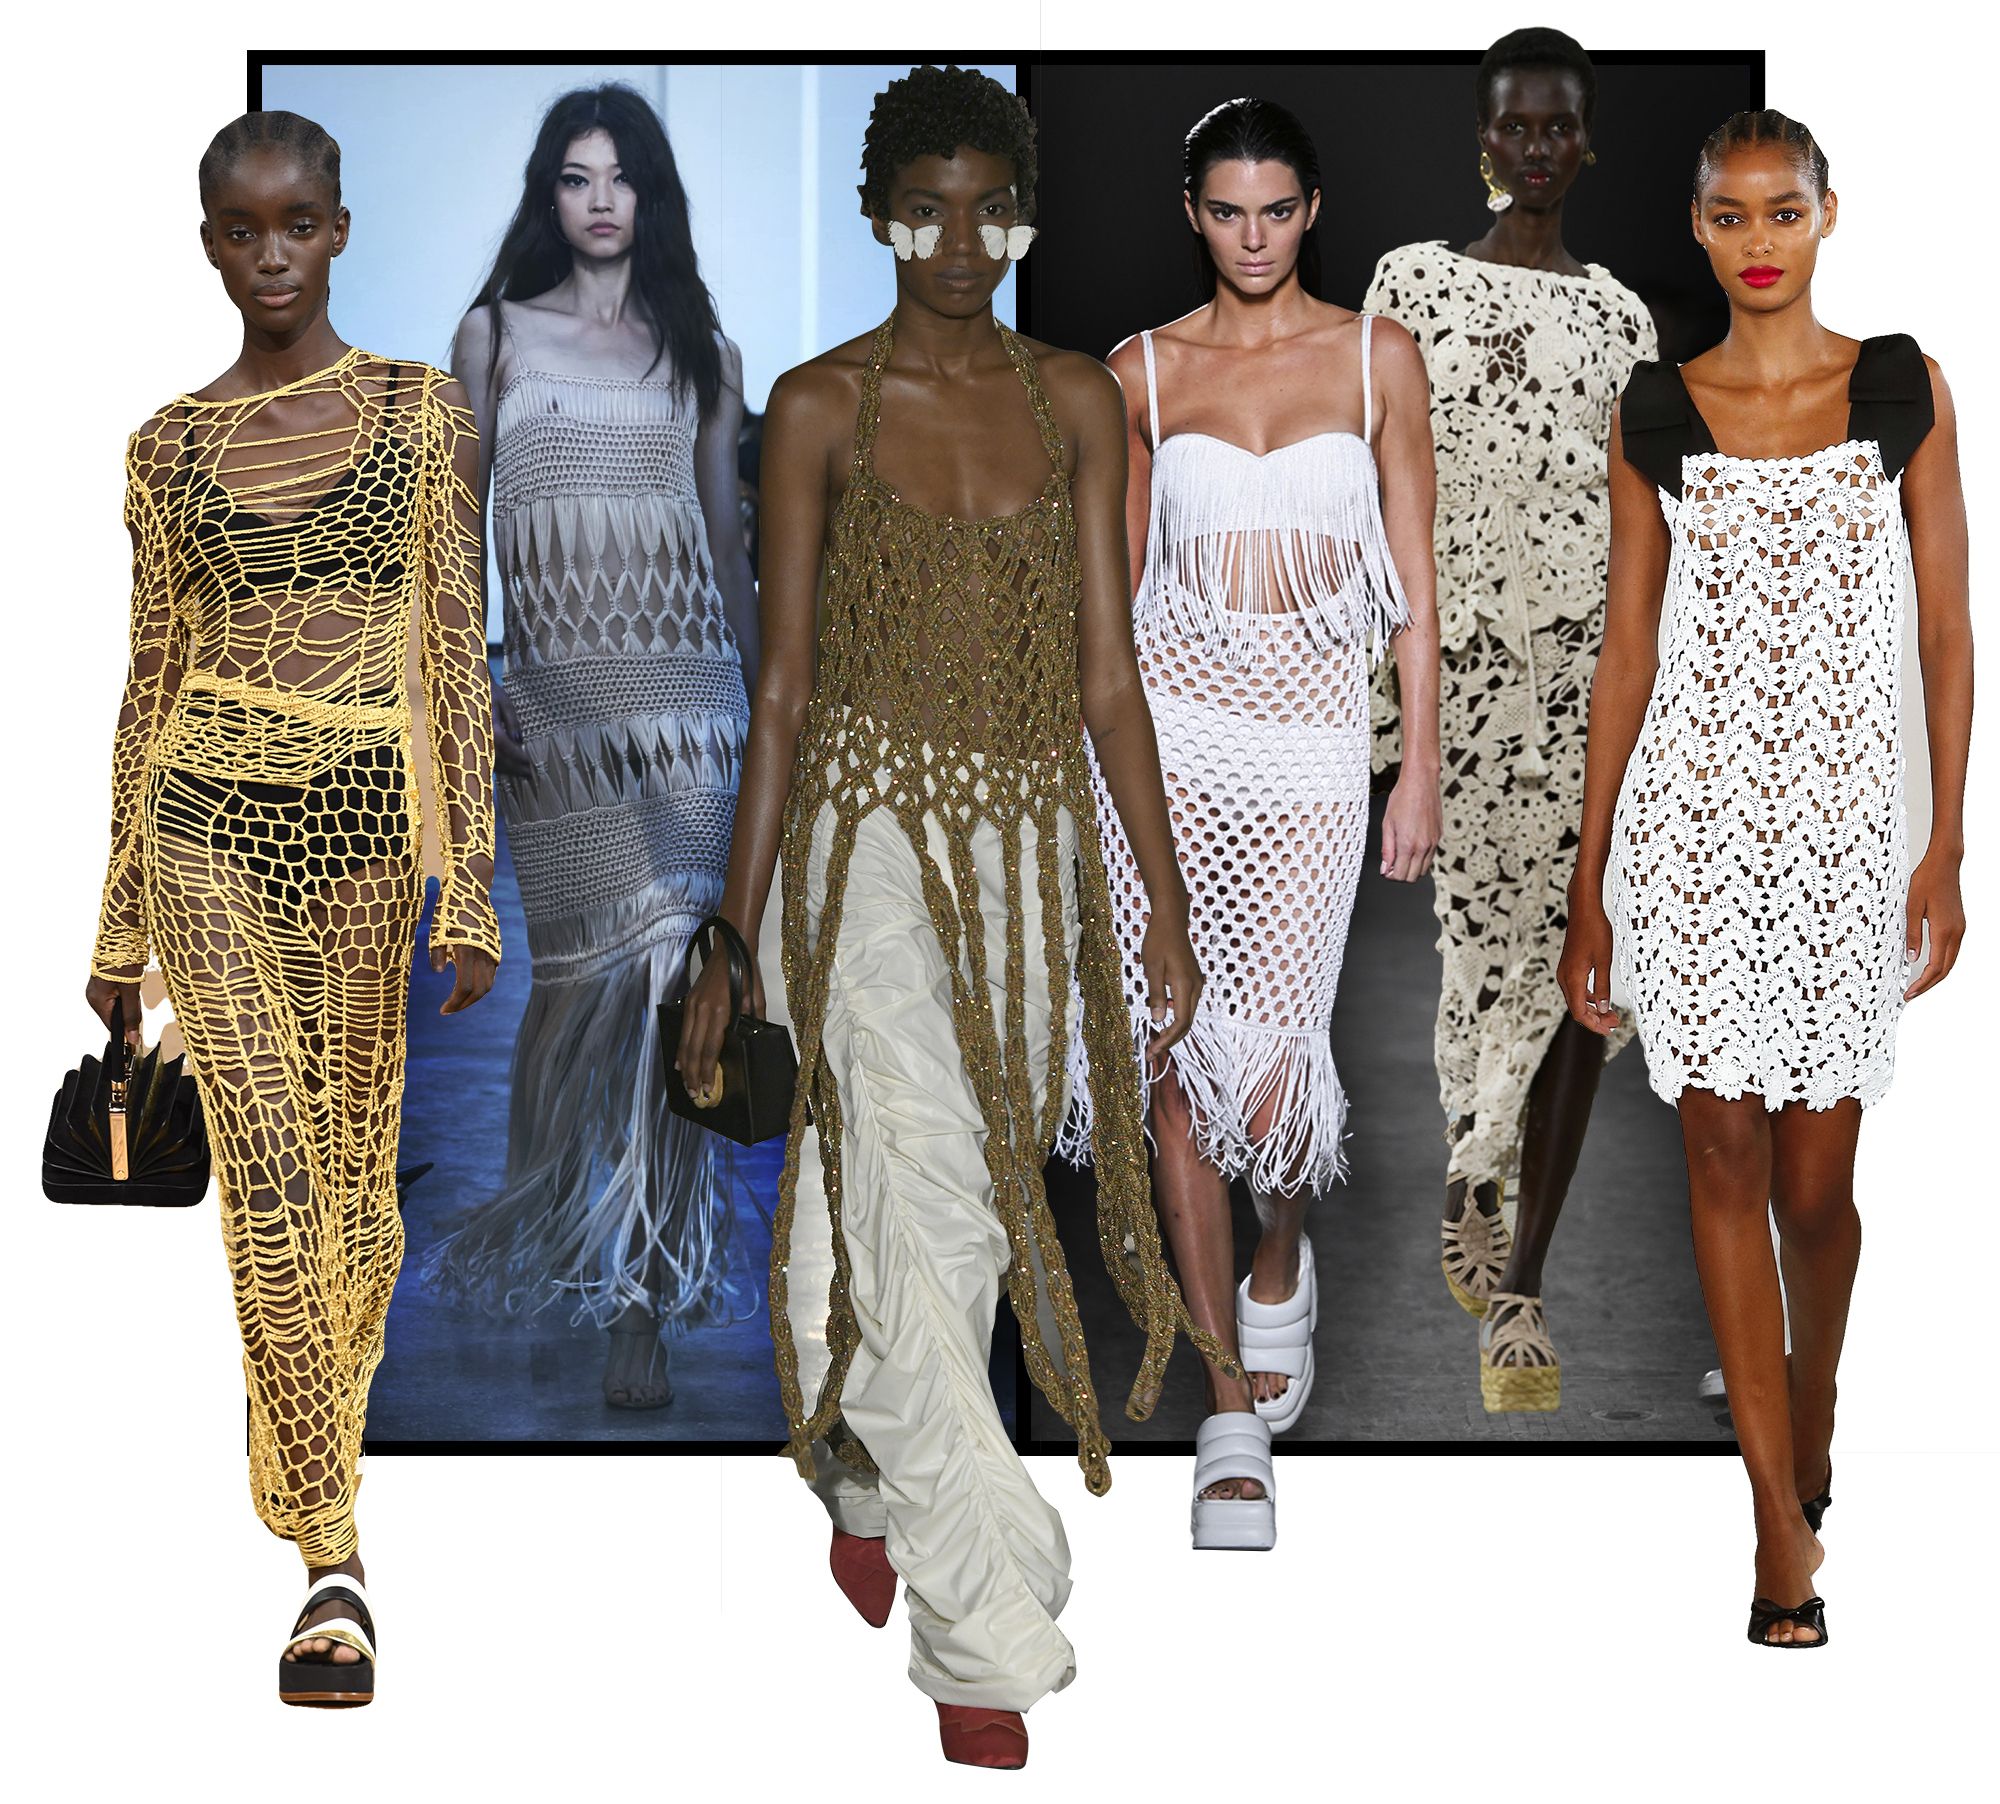 The Top 5 Print Trends for Spring Summer 2023